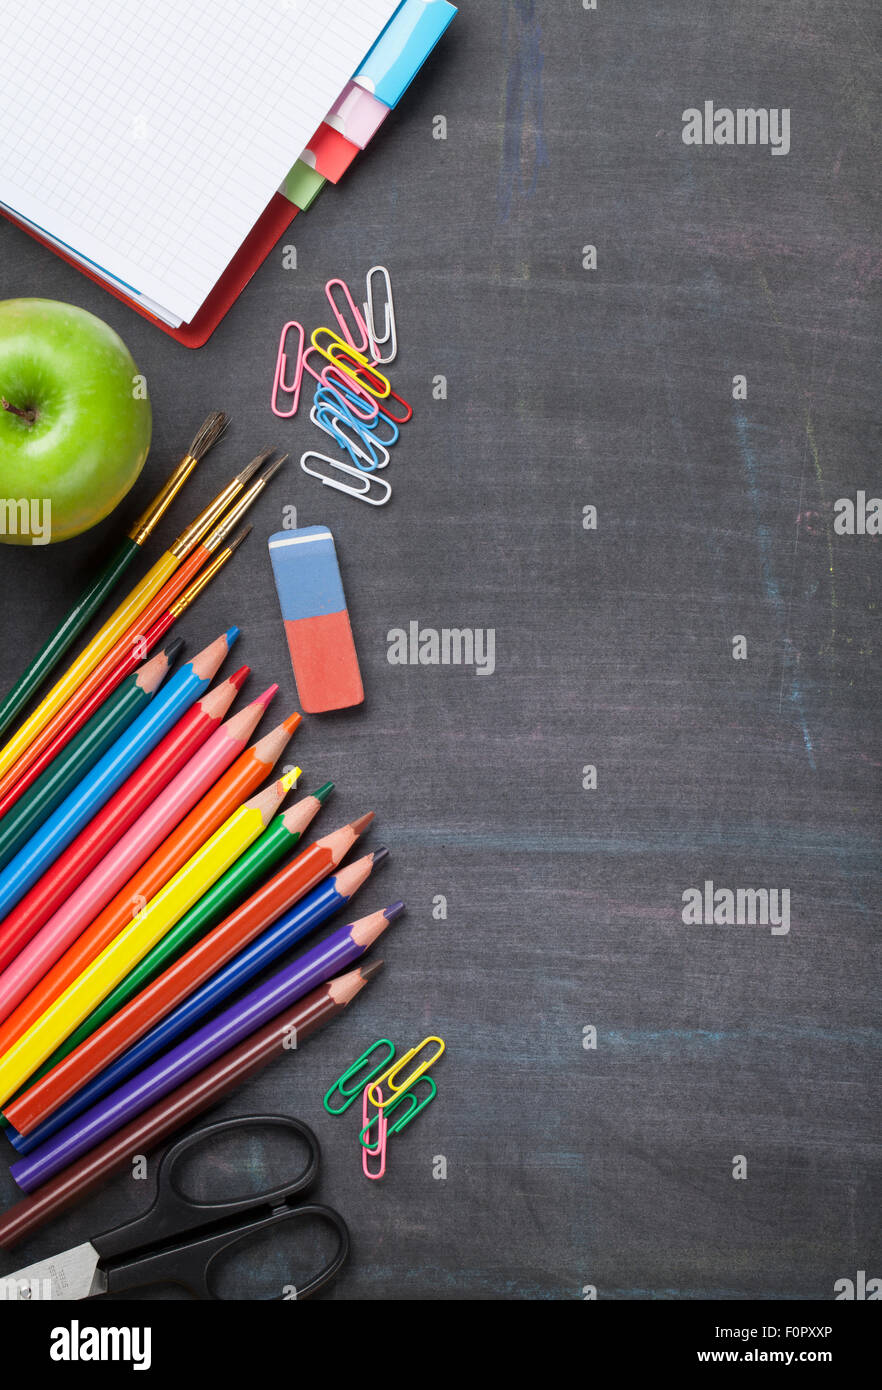 School and office supplies on blackboard background. Top view with copy space Stock Photo